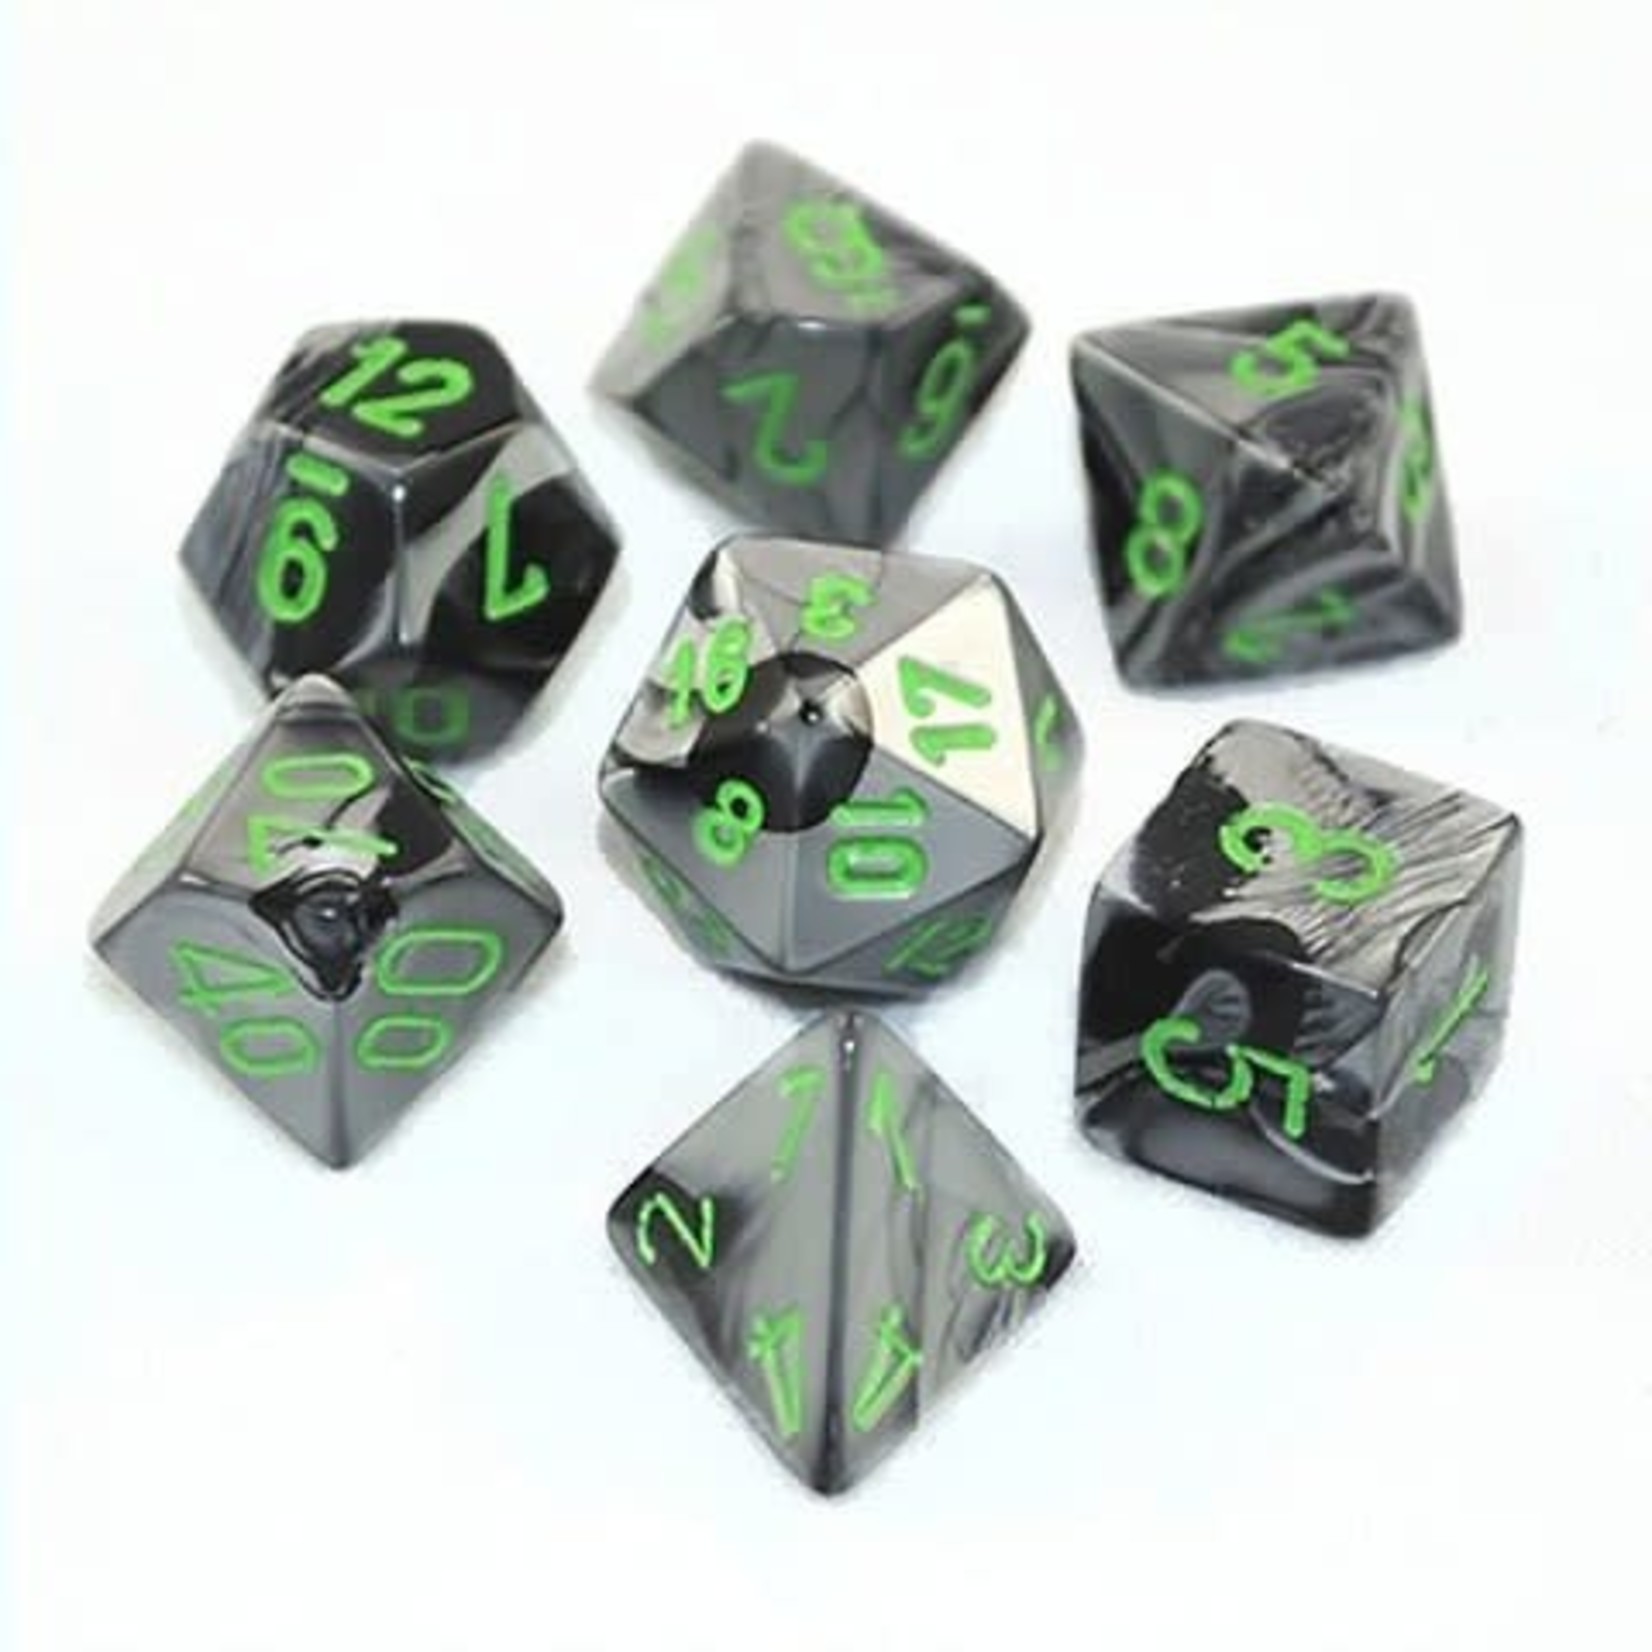 Chessex Chessex Gemini Black / Grey with Green Polyhedral 7 die set